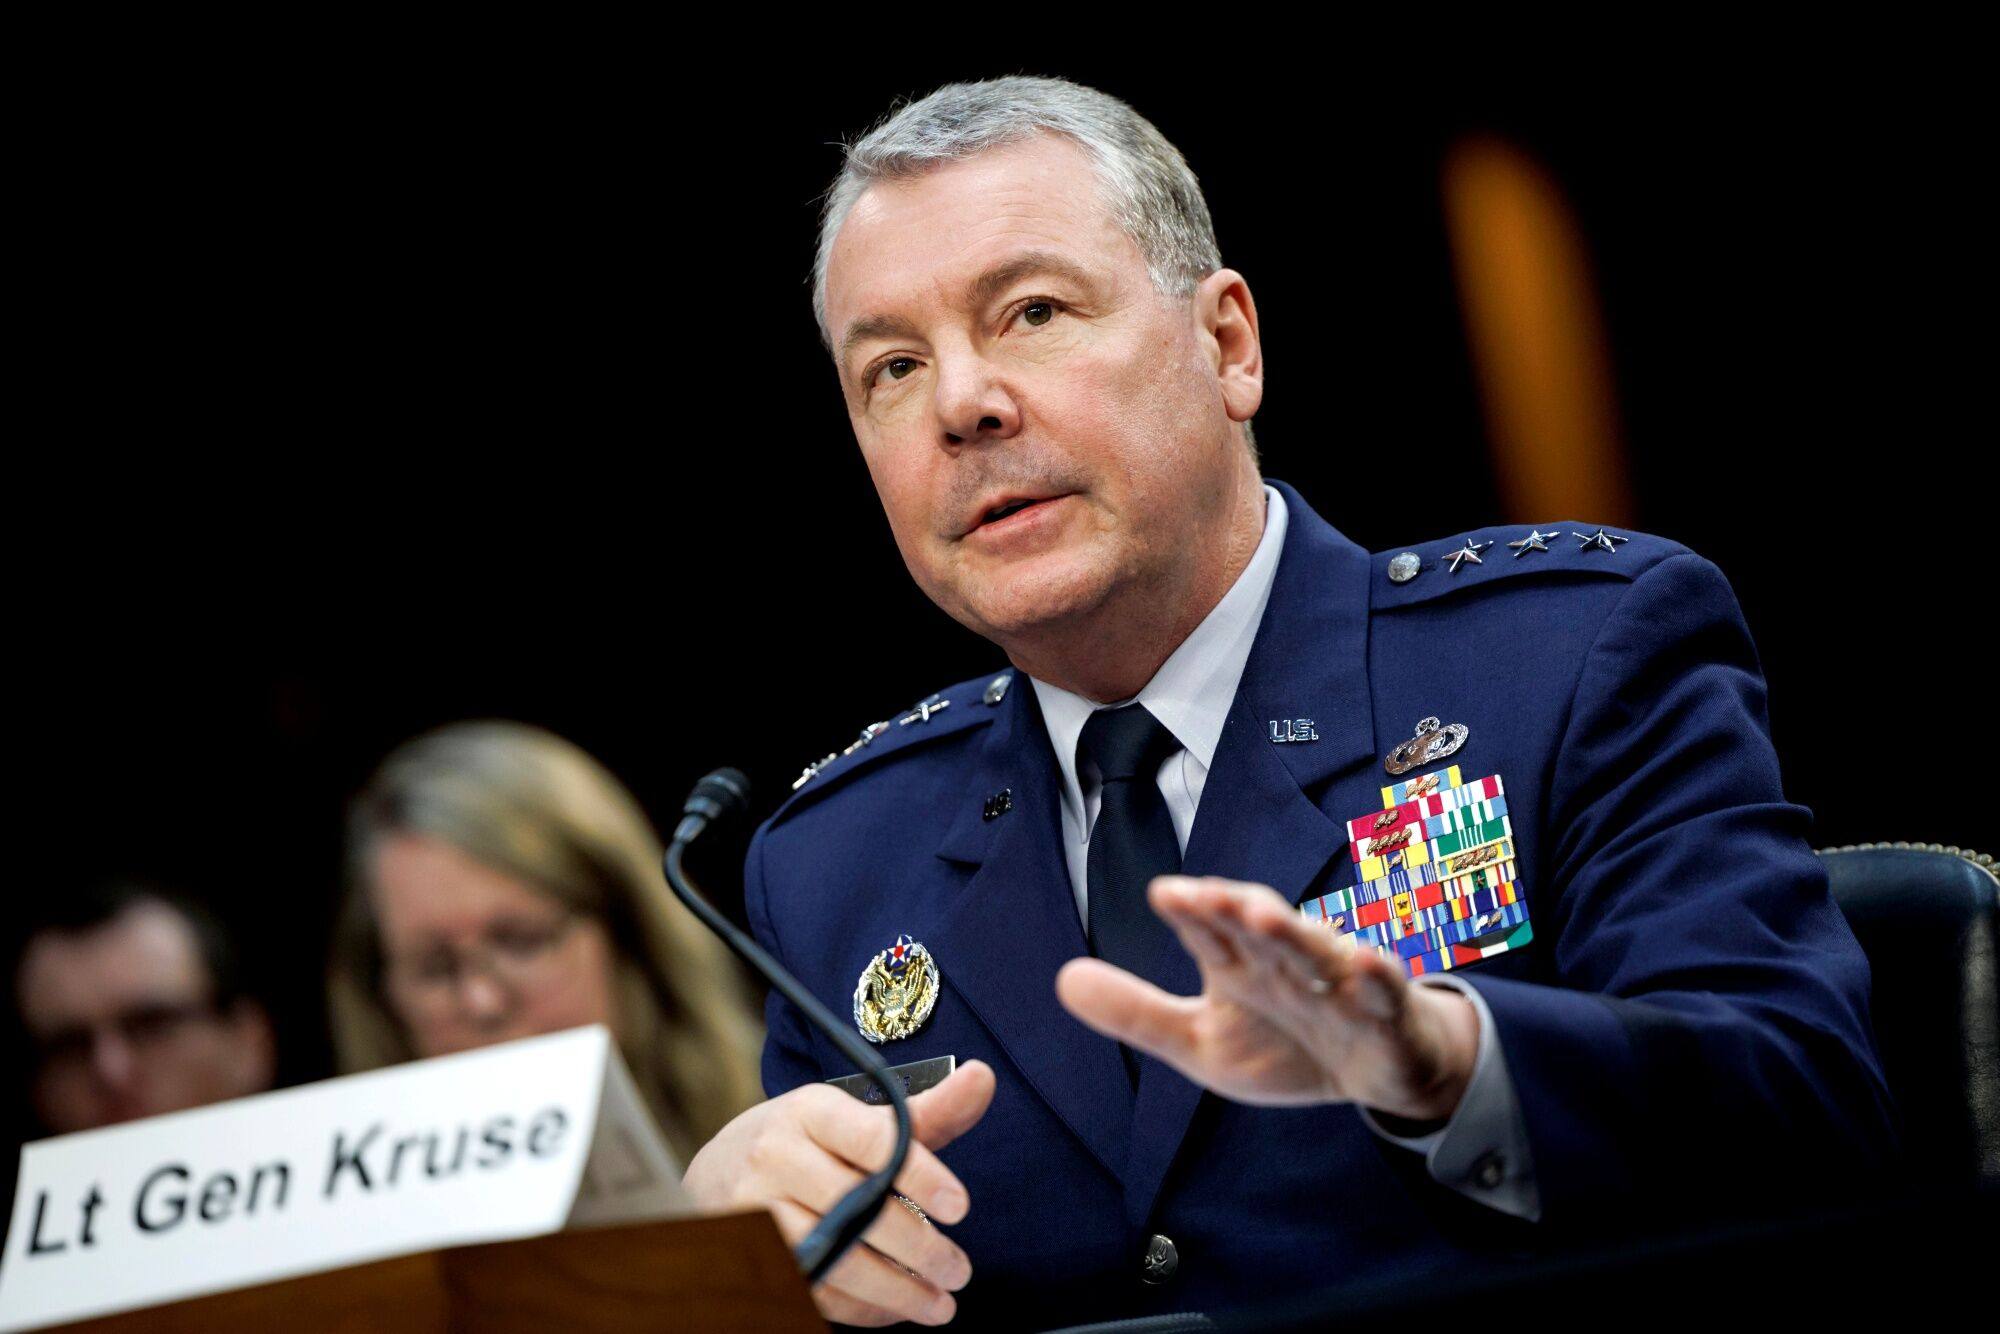 US Lieutenant General Jeffrey A. Kruse, director of the Defense Intelligence Agency, speaks during the Senate Armed Services Committee hearing in Washington on Thursday. Photo: Bloomberg